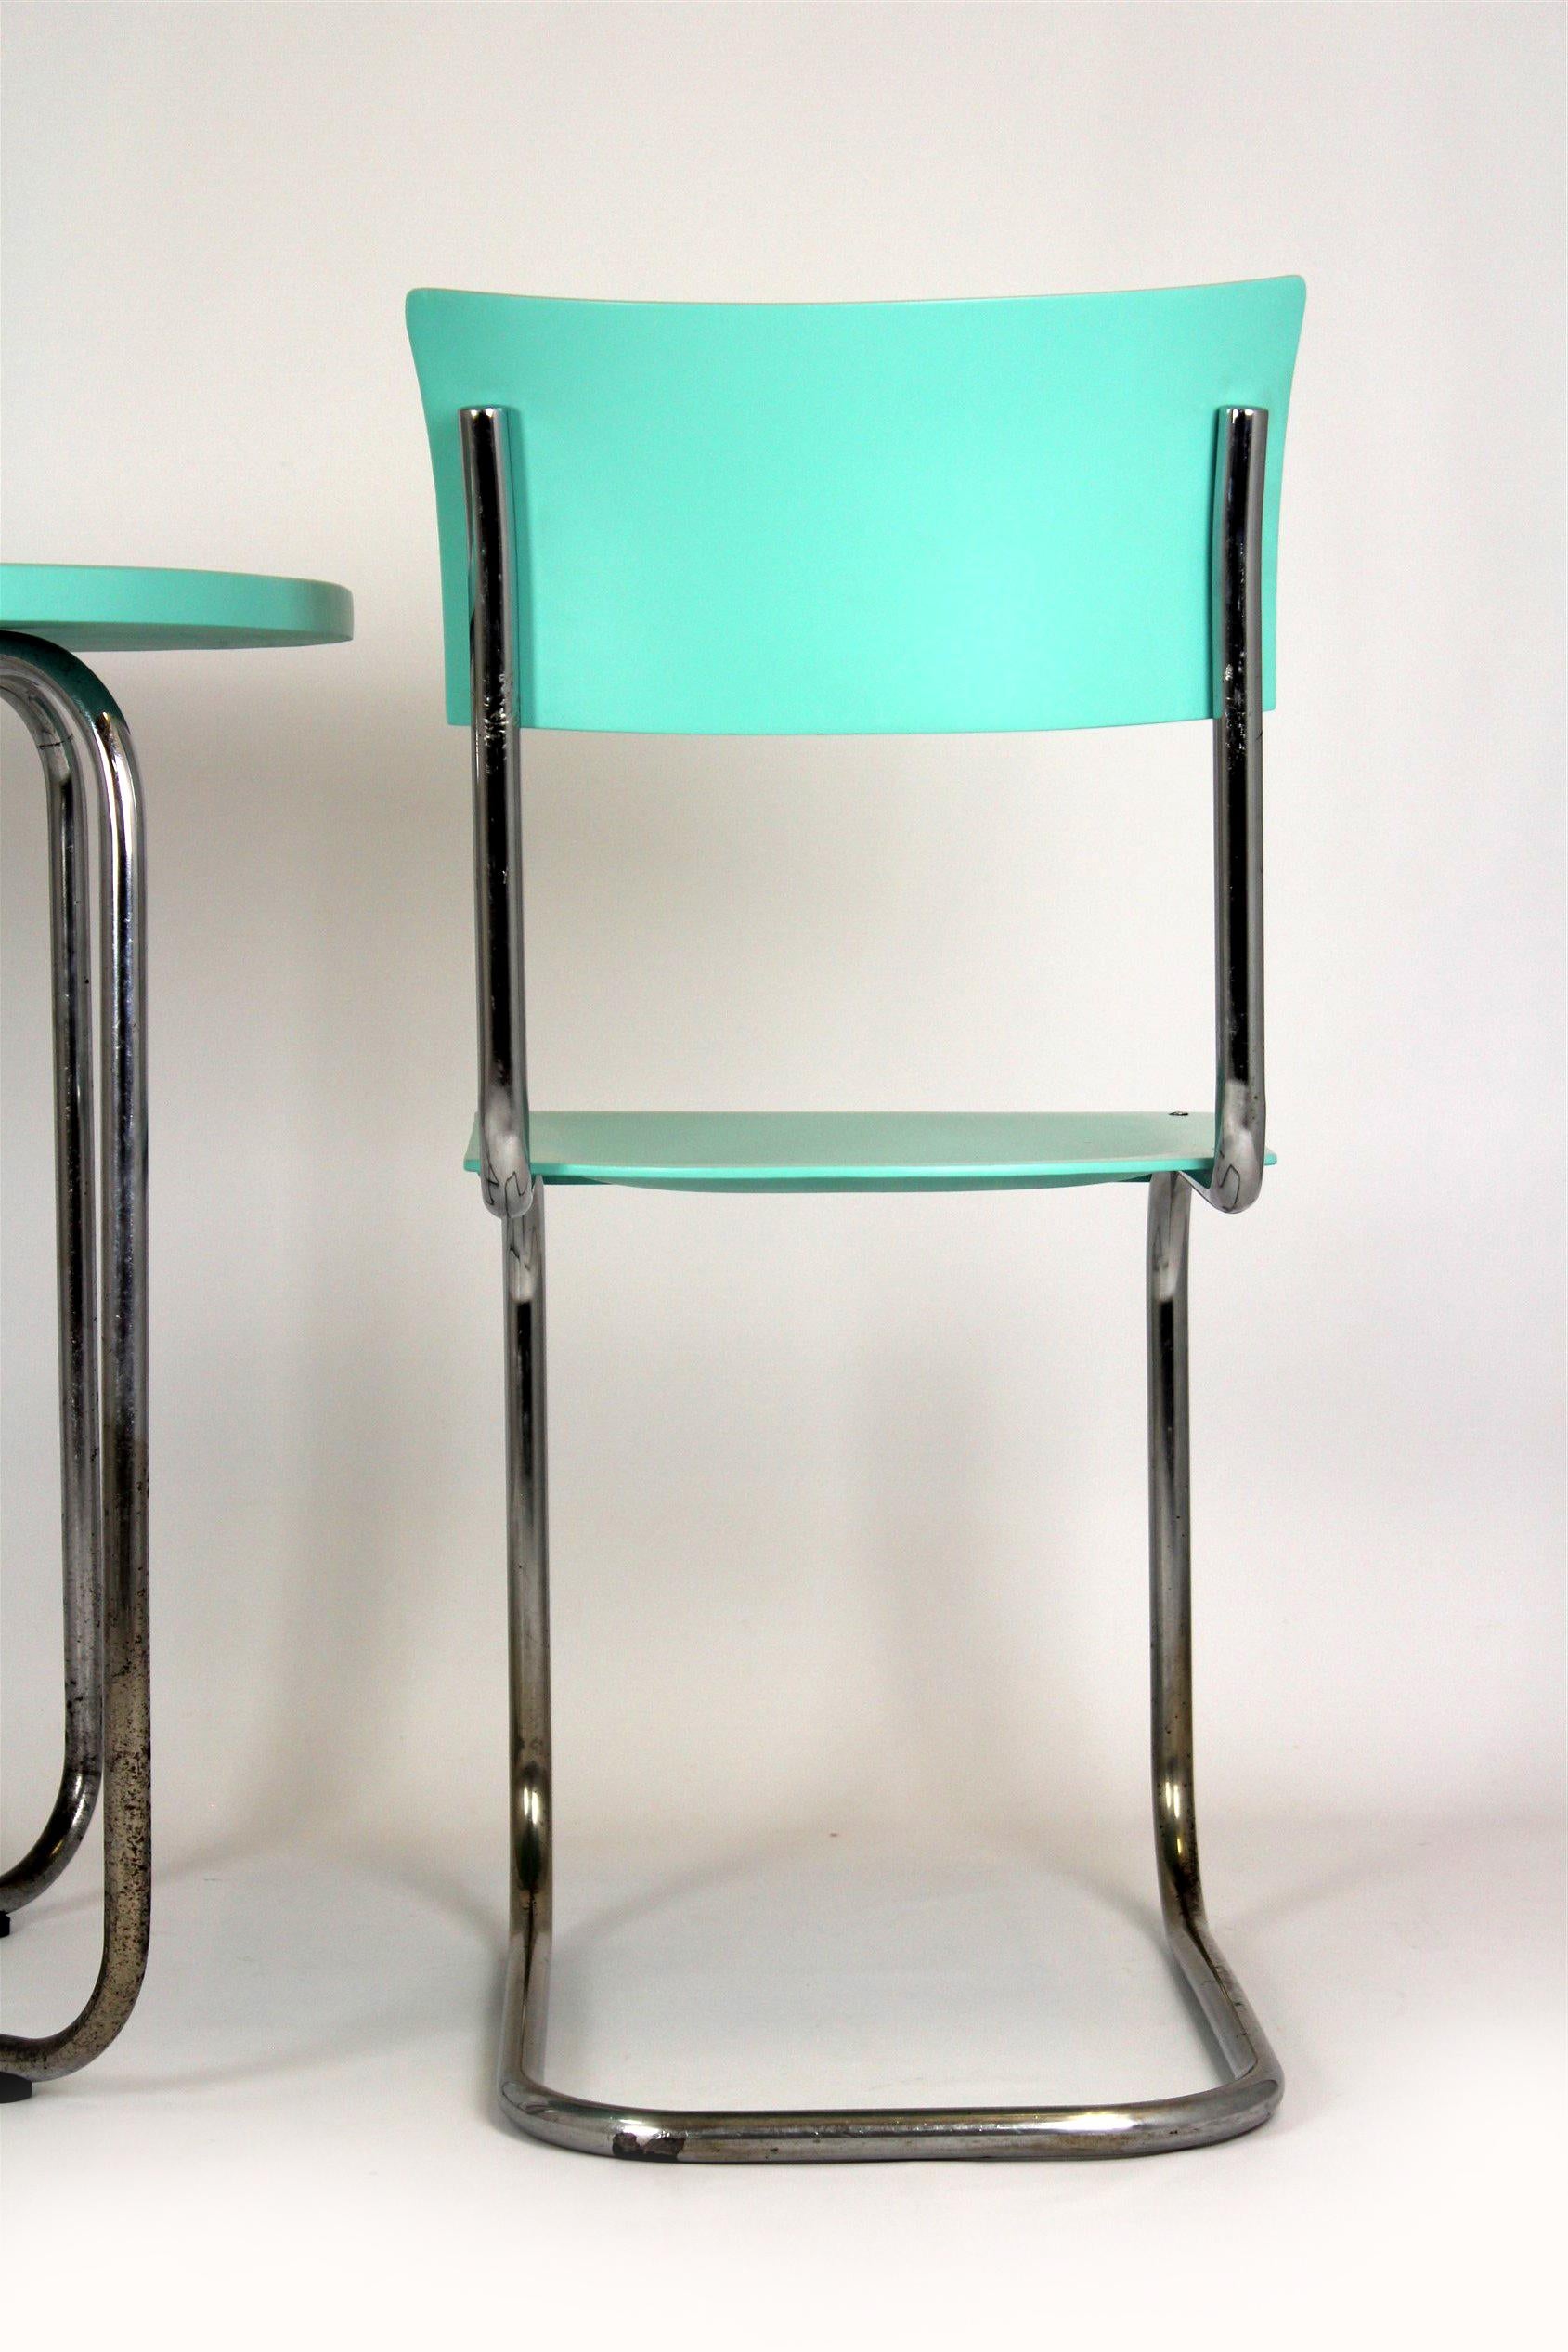 Bauhaus Tubular Steel Set, Round Table and Chair by Mart Stam, 1930s For Sale 11